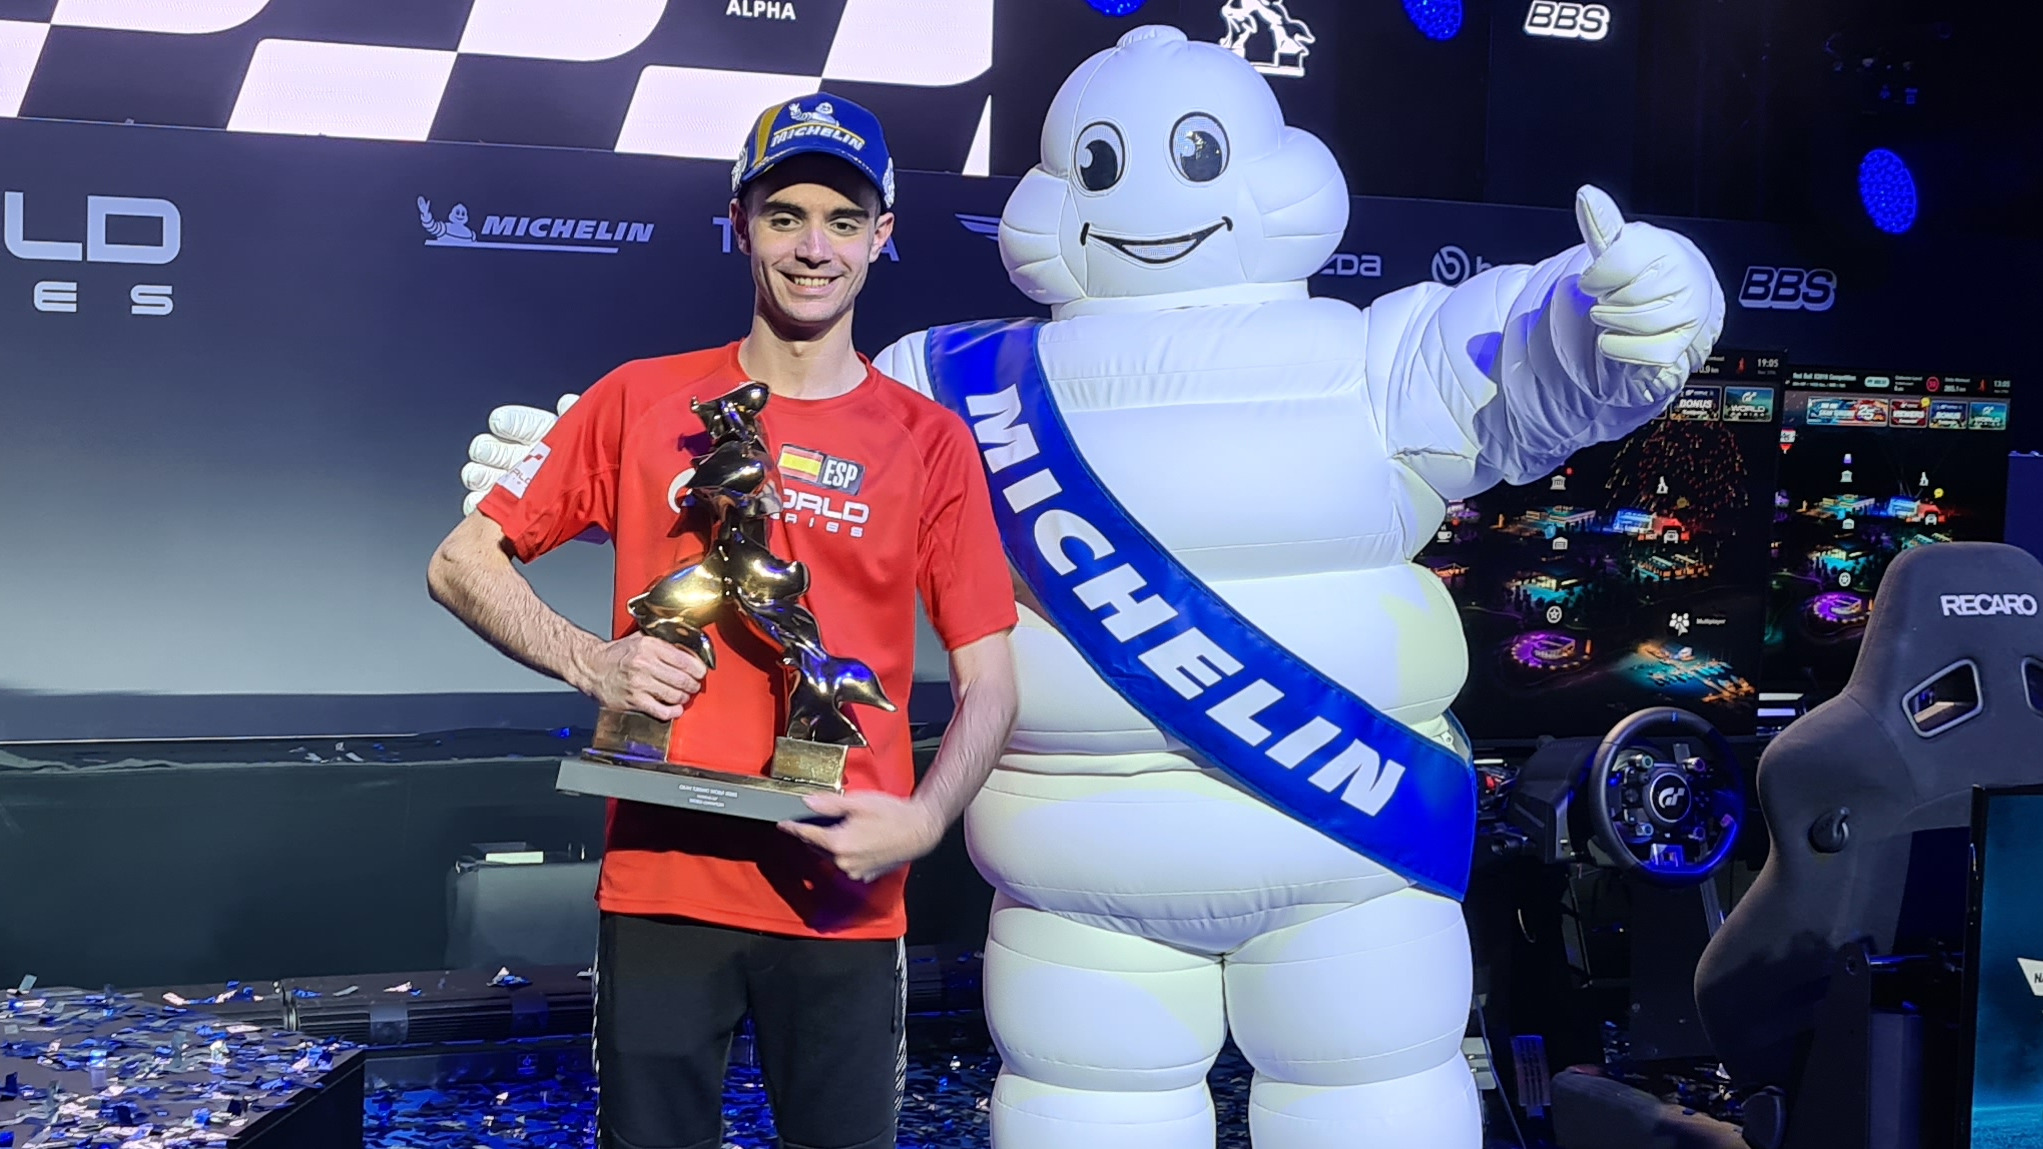 Coque Lopez Wins 2022 Gran Turismo World Series Nations Cup Final